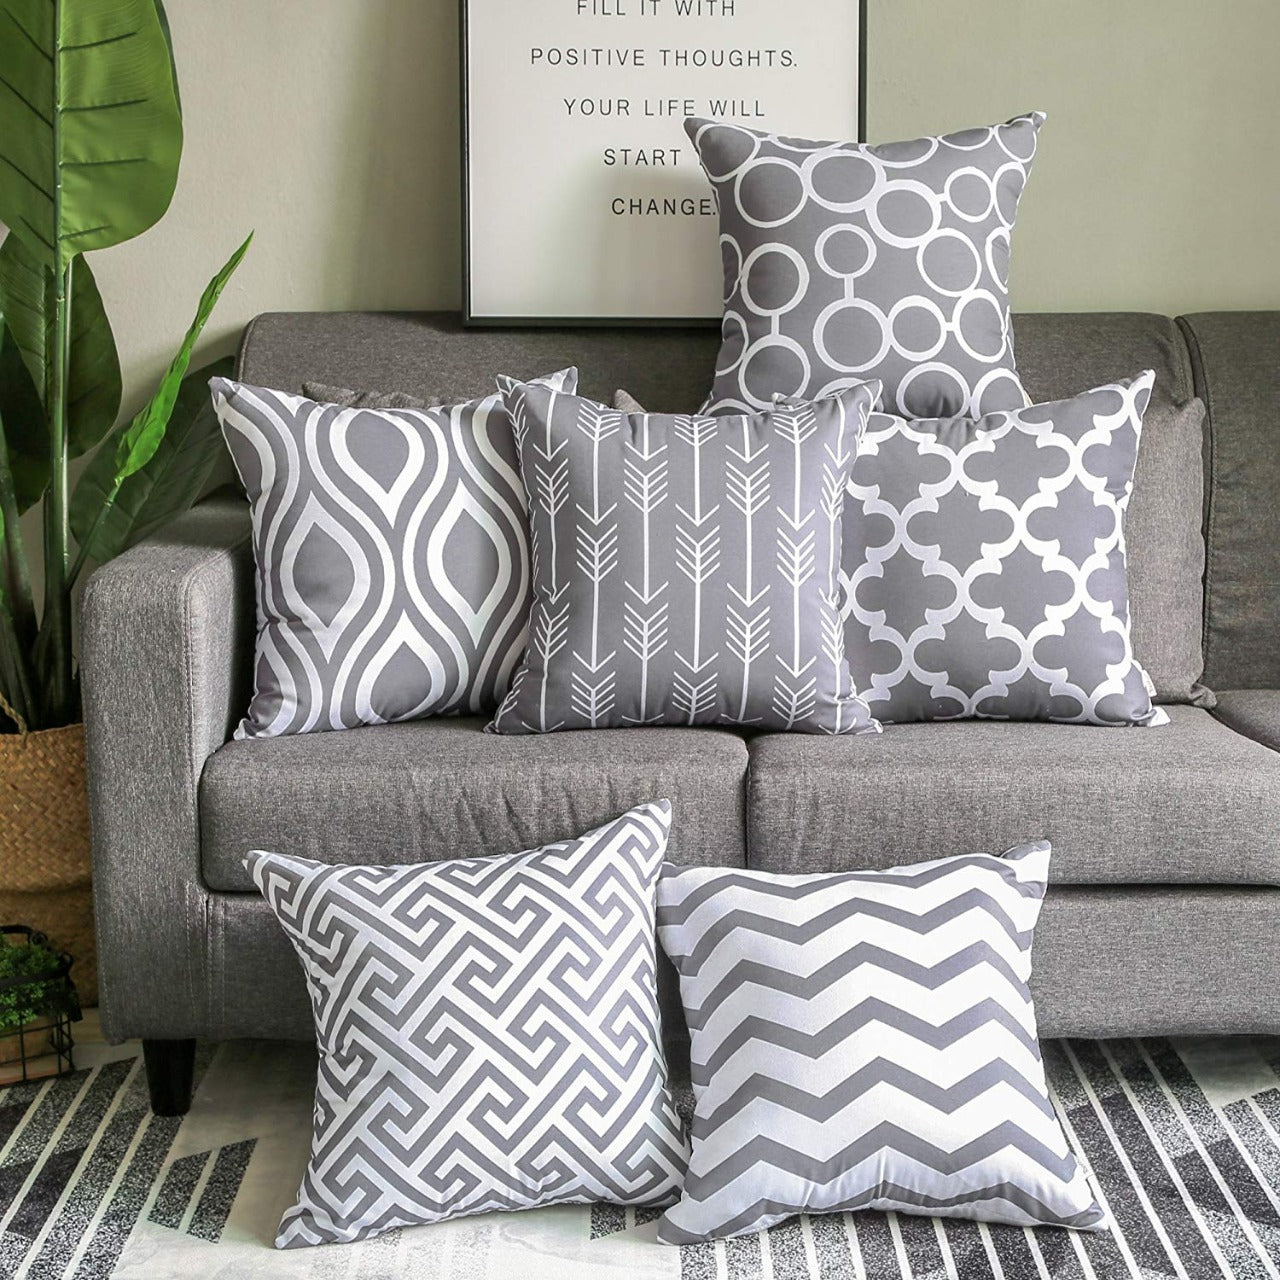 SWHF Soft Decorative Printed Velvet Cushion Cover Set of 6 (16 inch x 16 inch or 40 cm x 40 cm): Grey